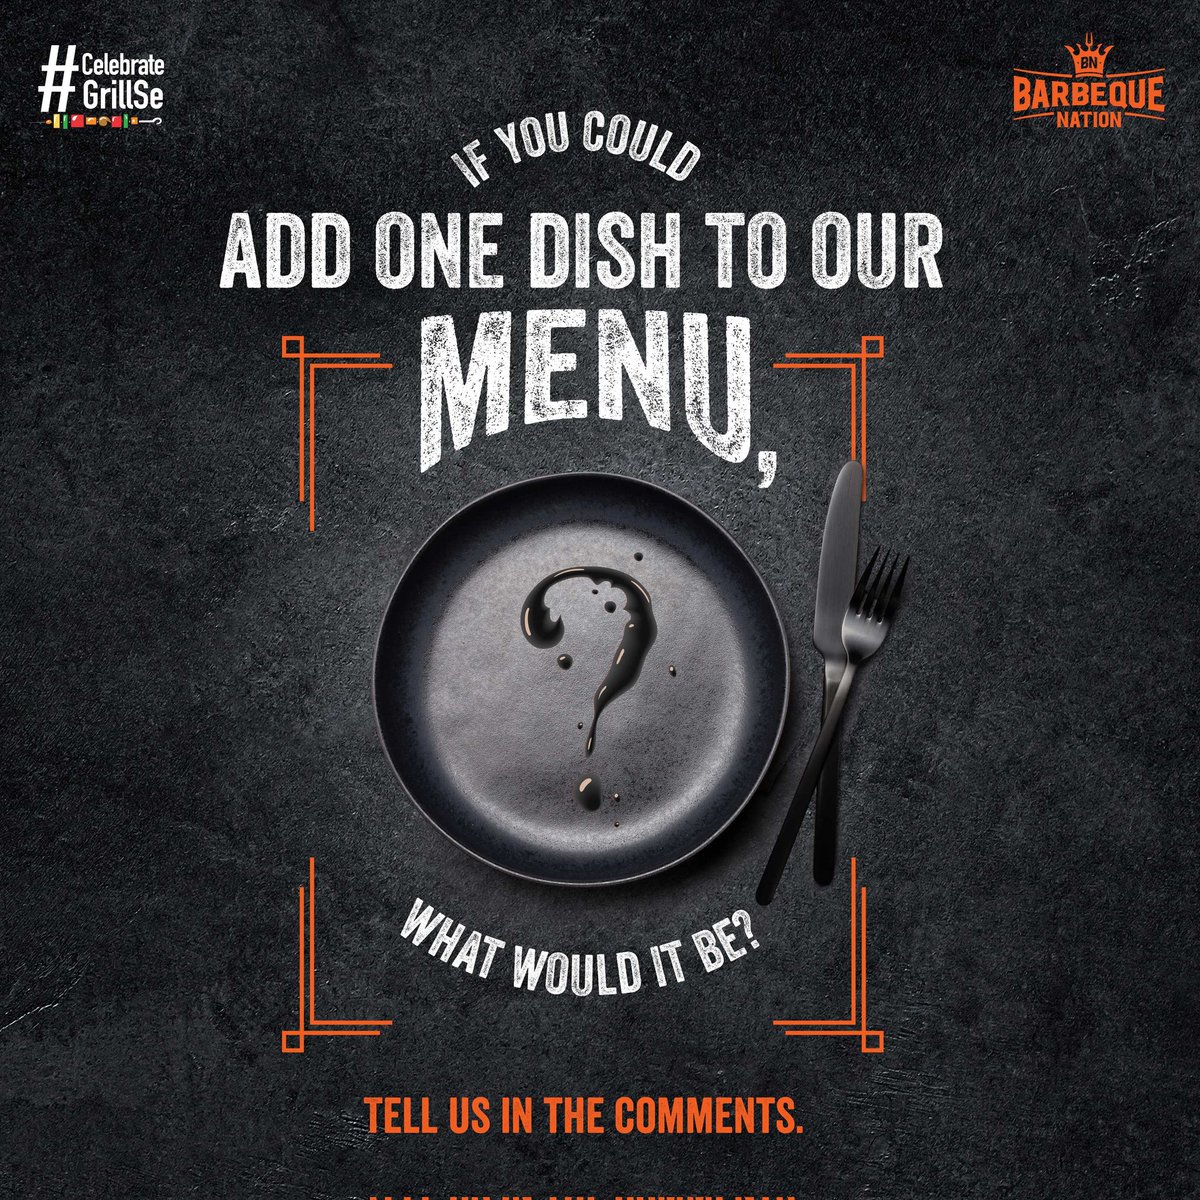 With great power comes great responsibility, comment👇🏻 what’s your pick for the BBQN Menu #barbeque_nation #barbequenation #food #foodlovers #foodie #menu #dish #cuisines #addtomenu #instafood #instafoodie